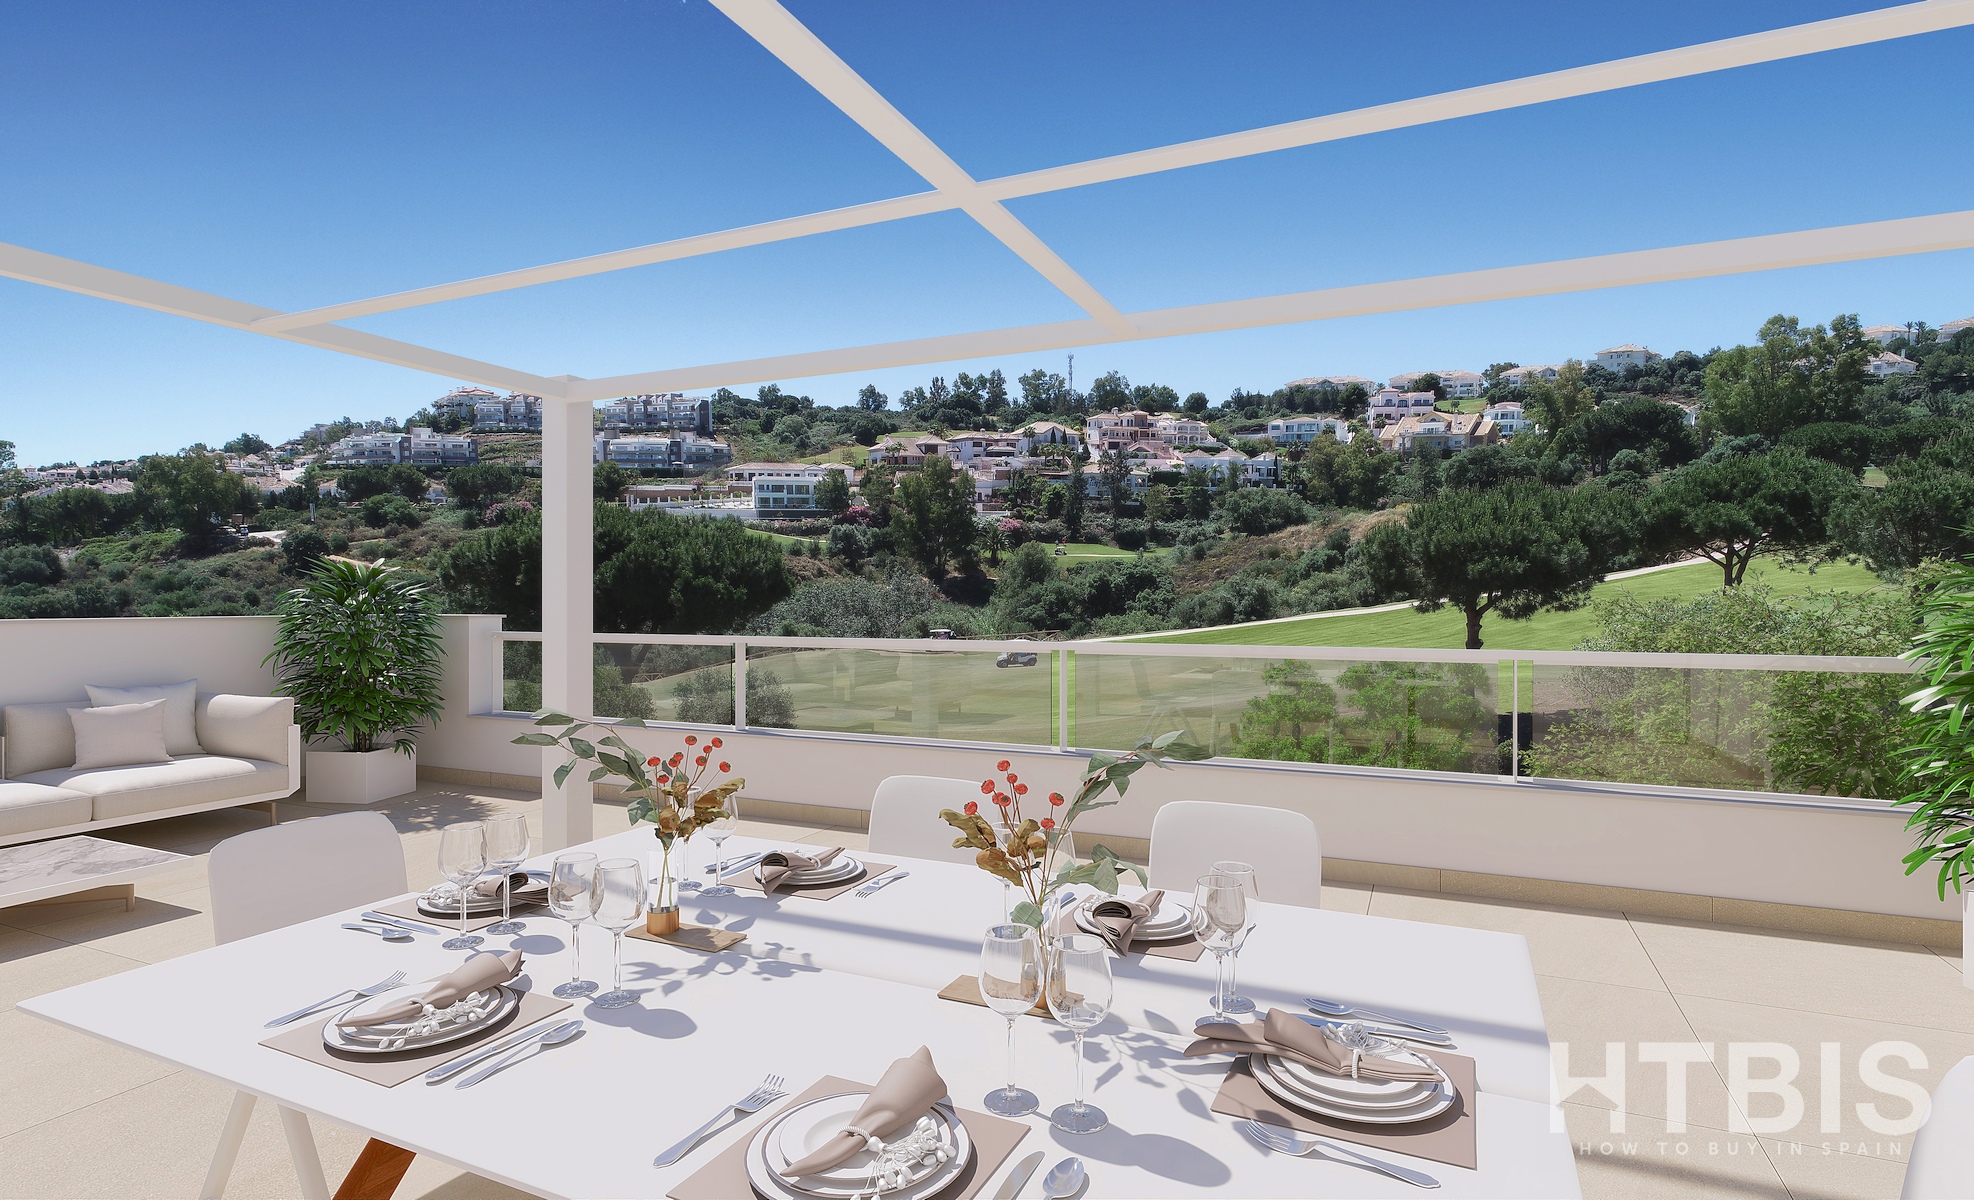 A new build apartment in Malaga with a balcony overlooking a golf course.